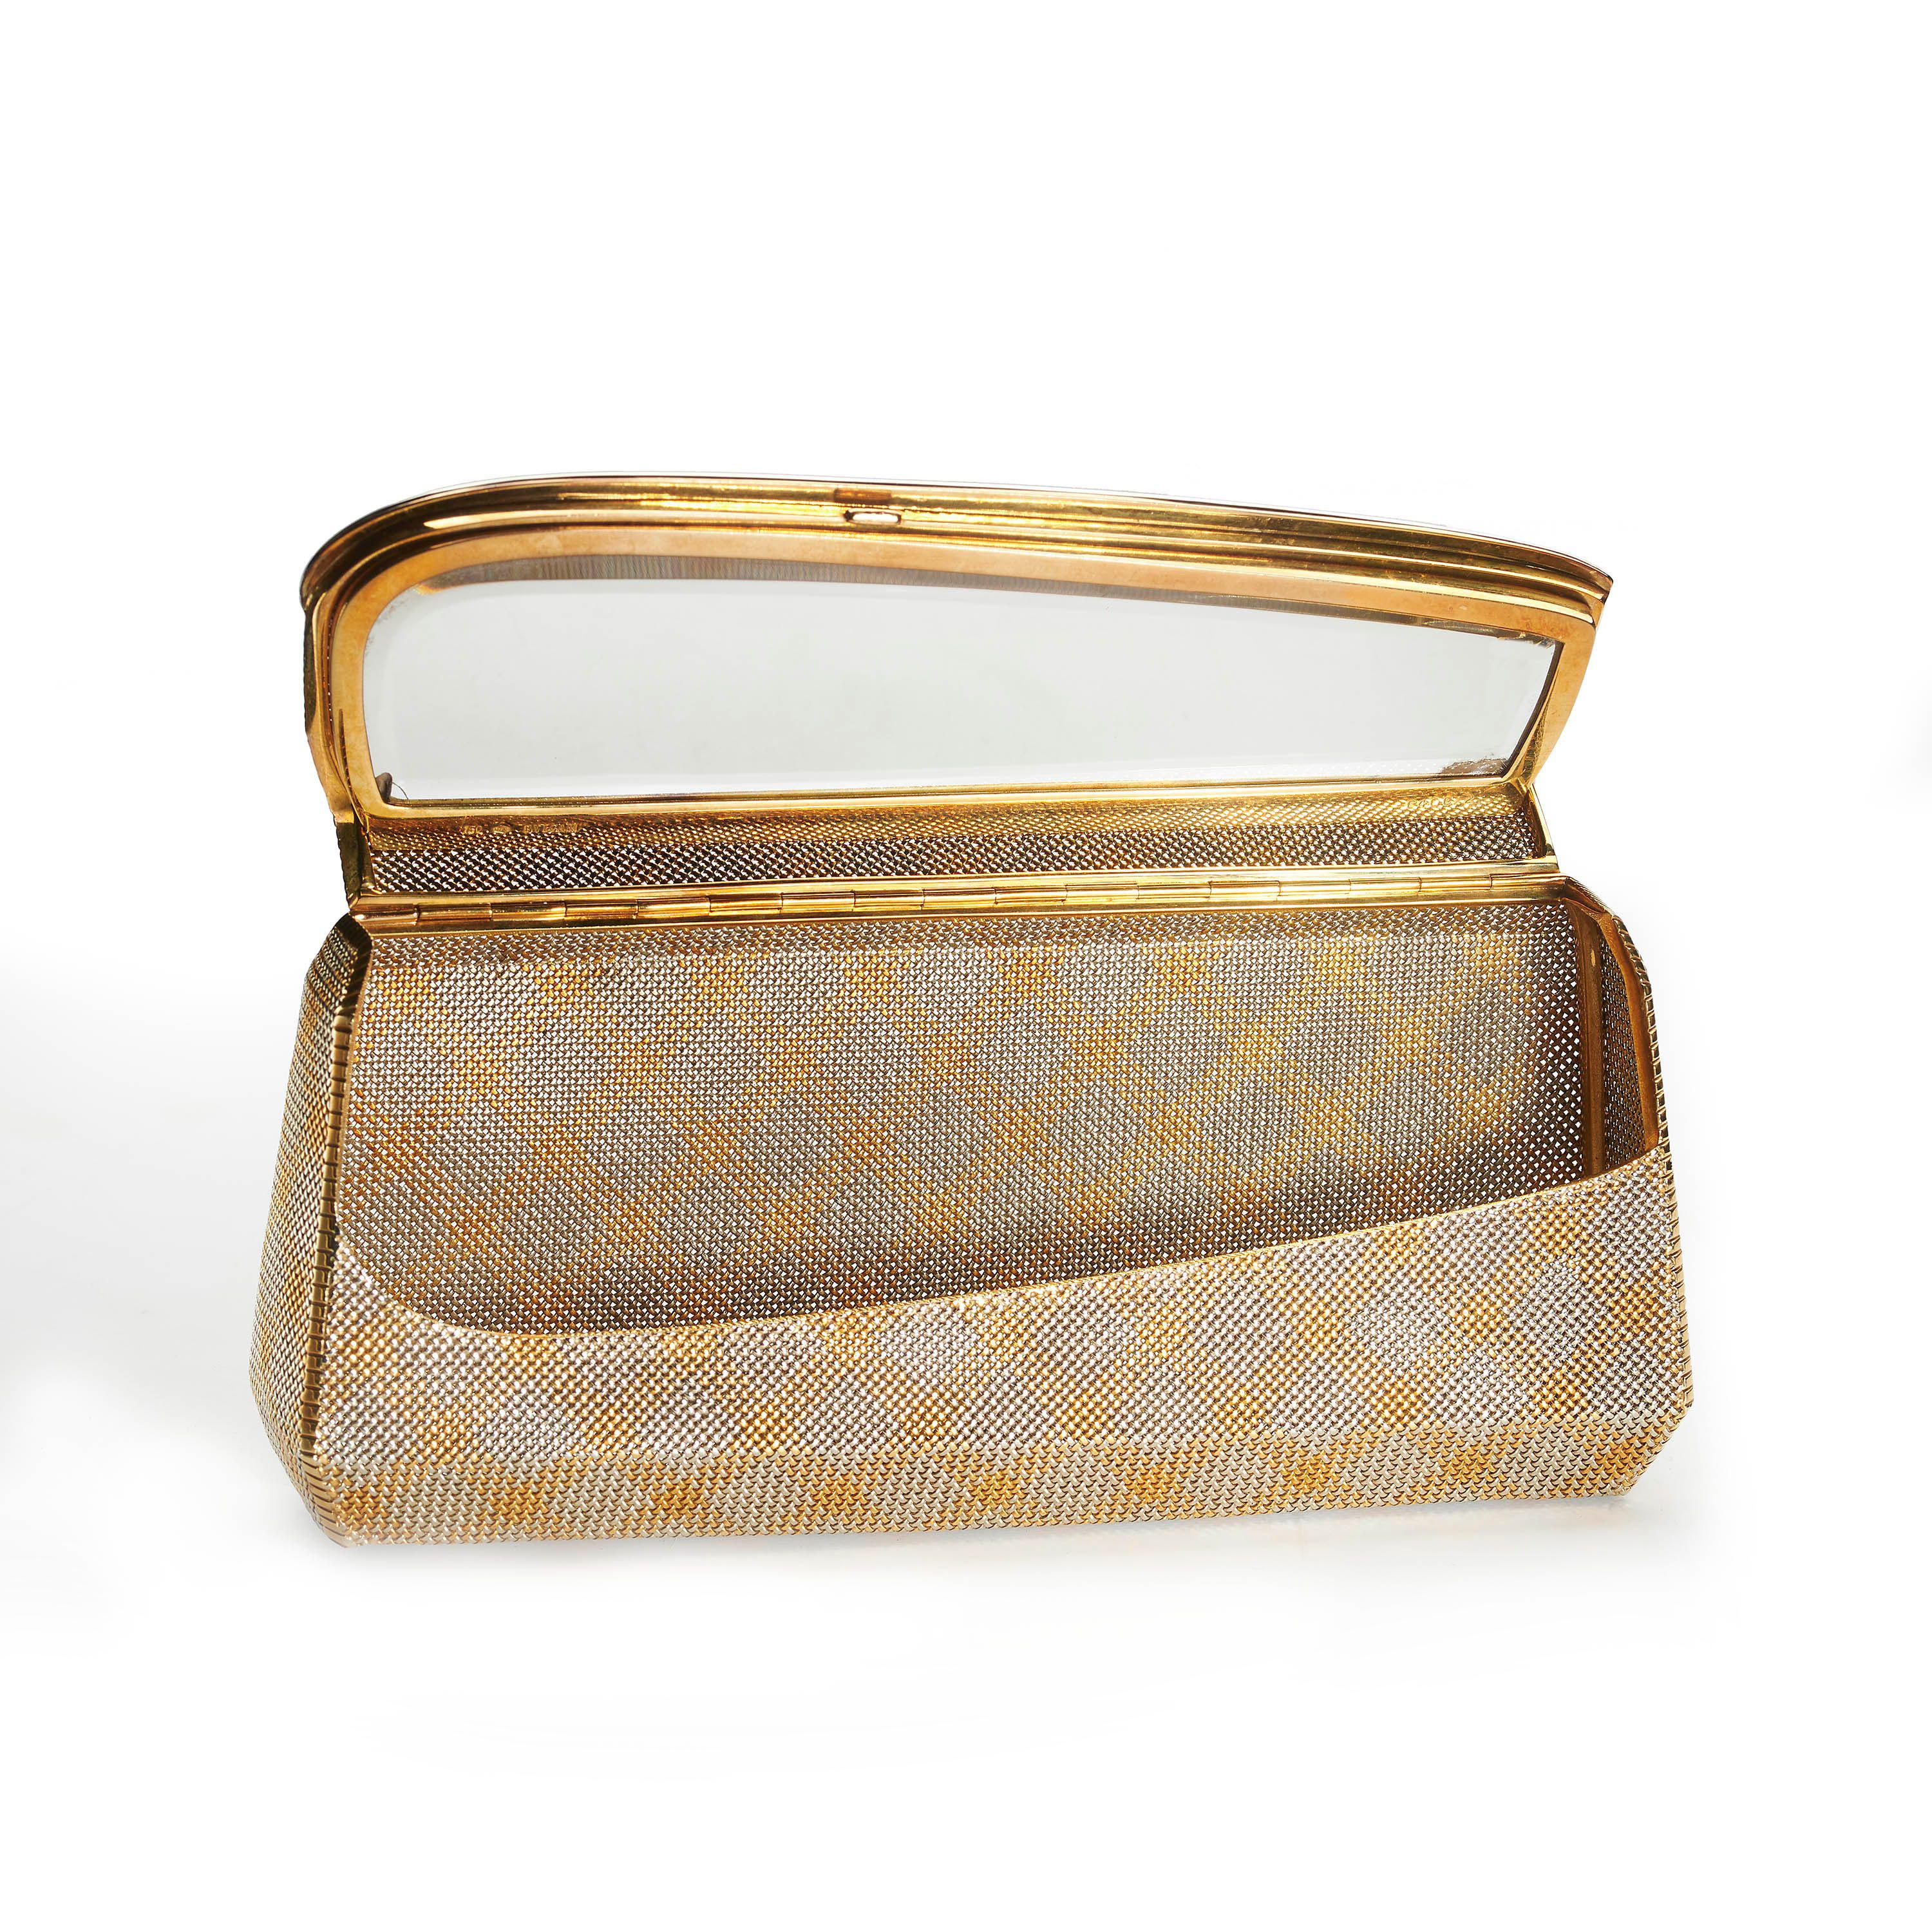 A vintage Bulgari white and yellow gold bag, with yellow gold criss cross patterns over a white gold background, in woven 18ct gold, with a mirror within the lid, signed BVLGARI, with 750 fineness mark, 678AL Italian mark, numbered 6466/2, circa